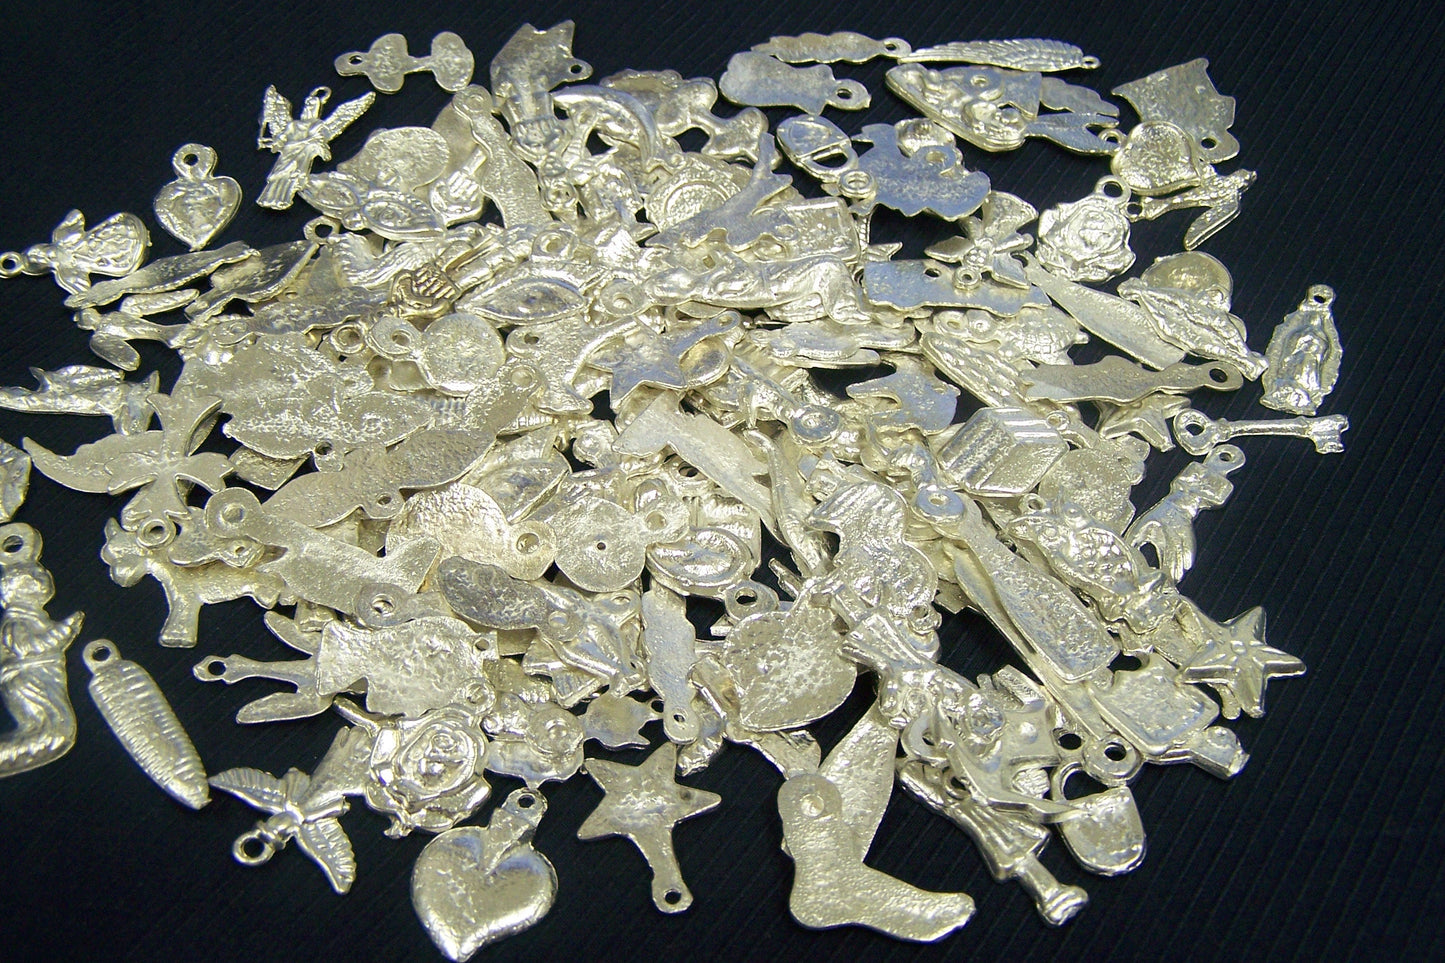 Lot of 100 Assorted Shiny Silver-Colored Milagros, Mexico